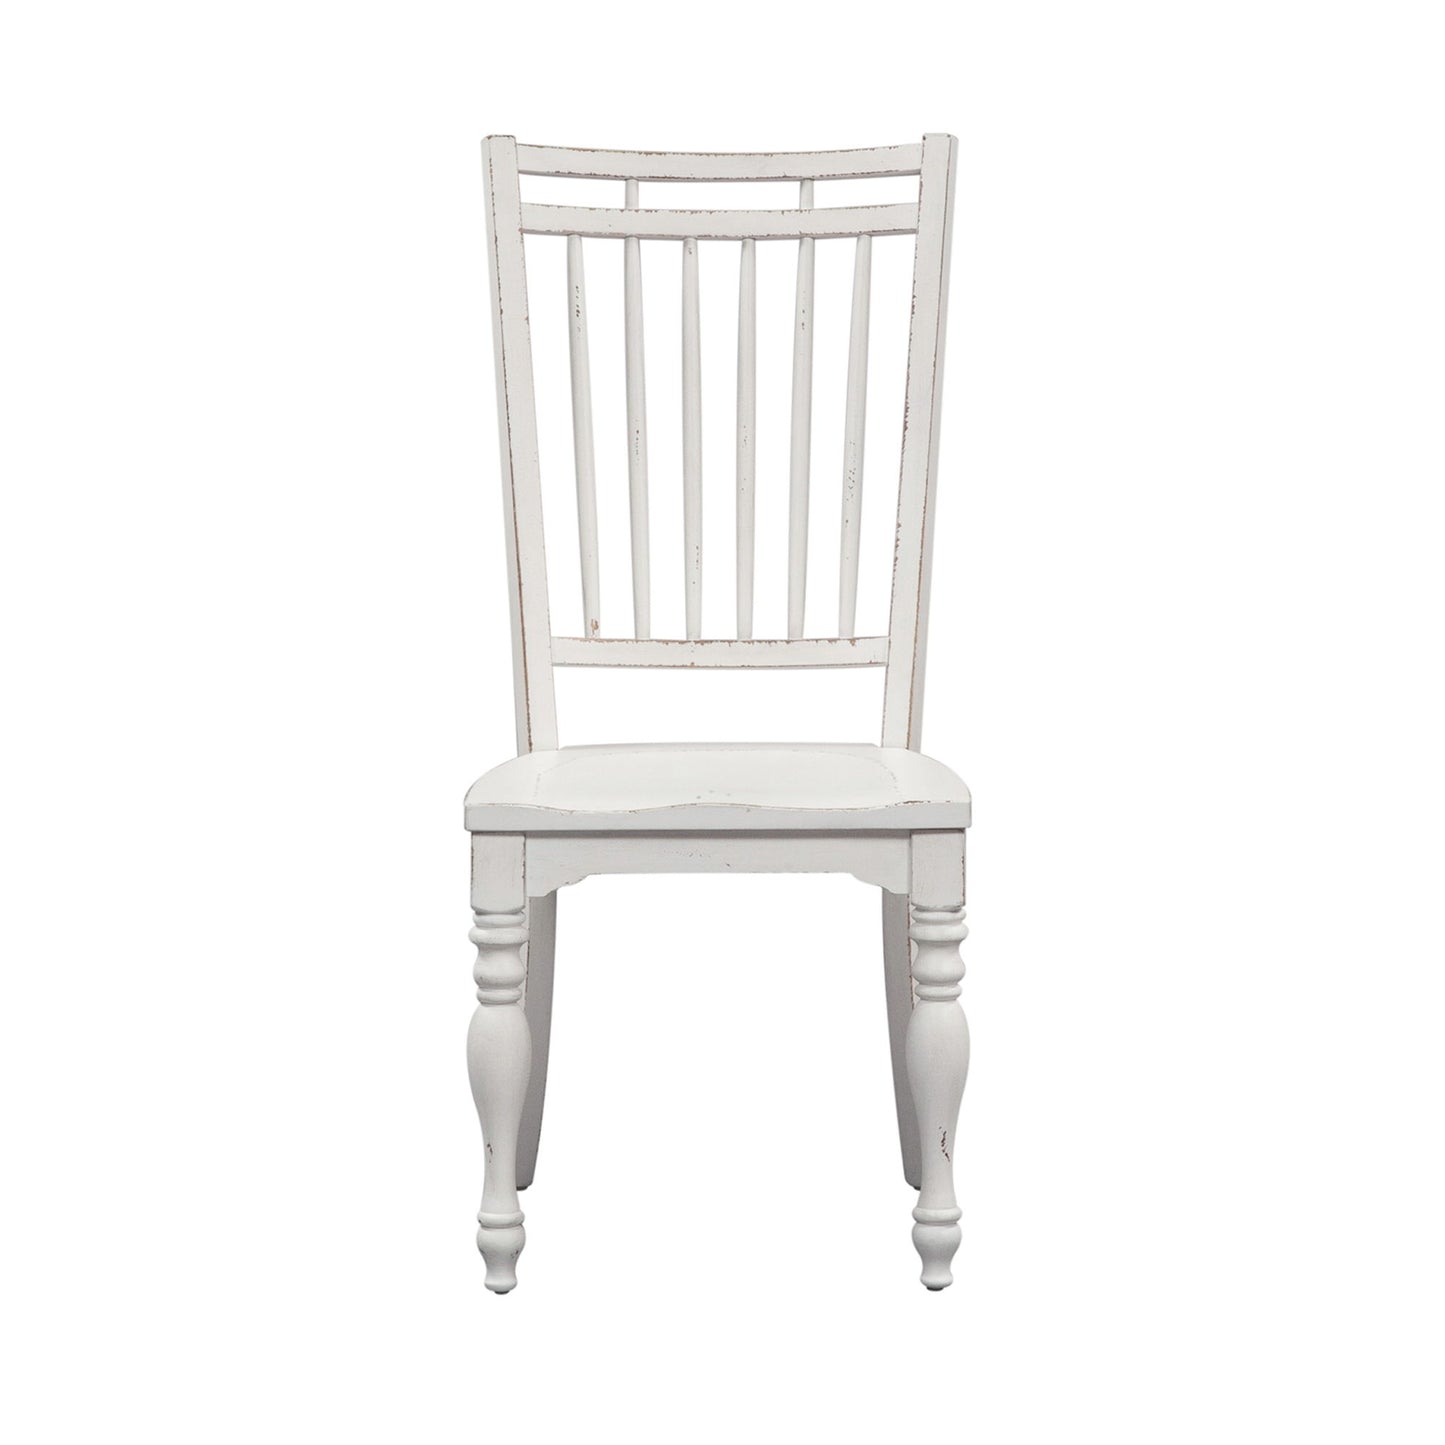 Magnolia Manor - Spindle Back Side Chair - White